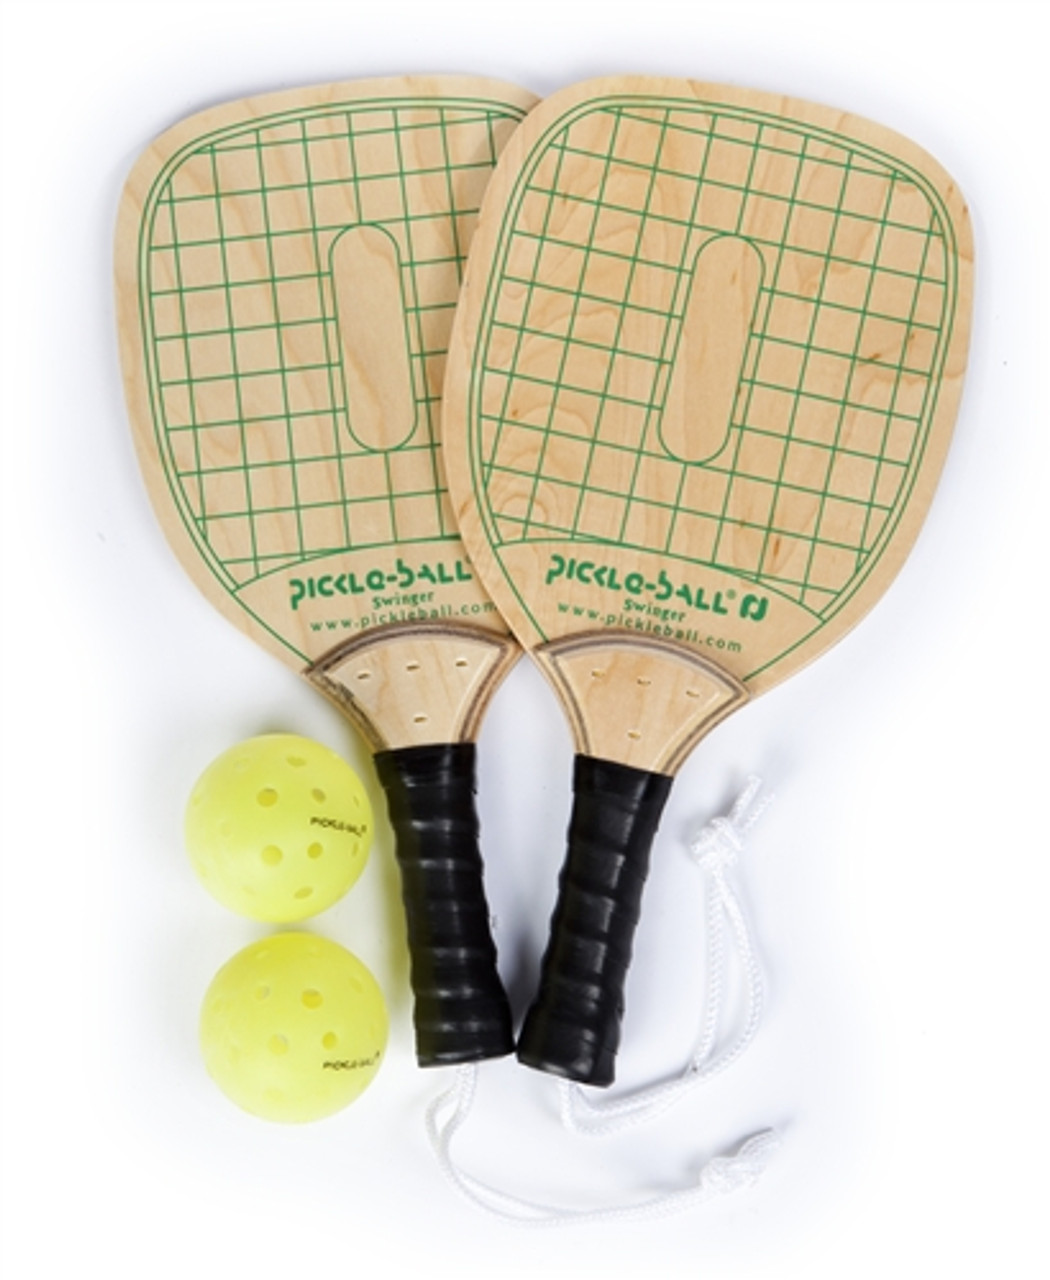 pickle-ball swinger wood paddle